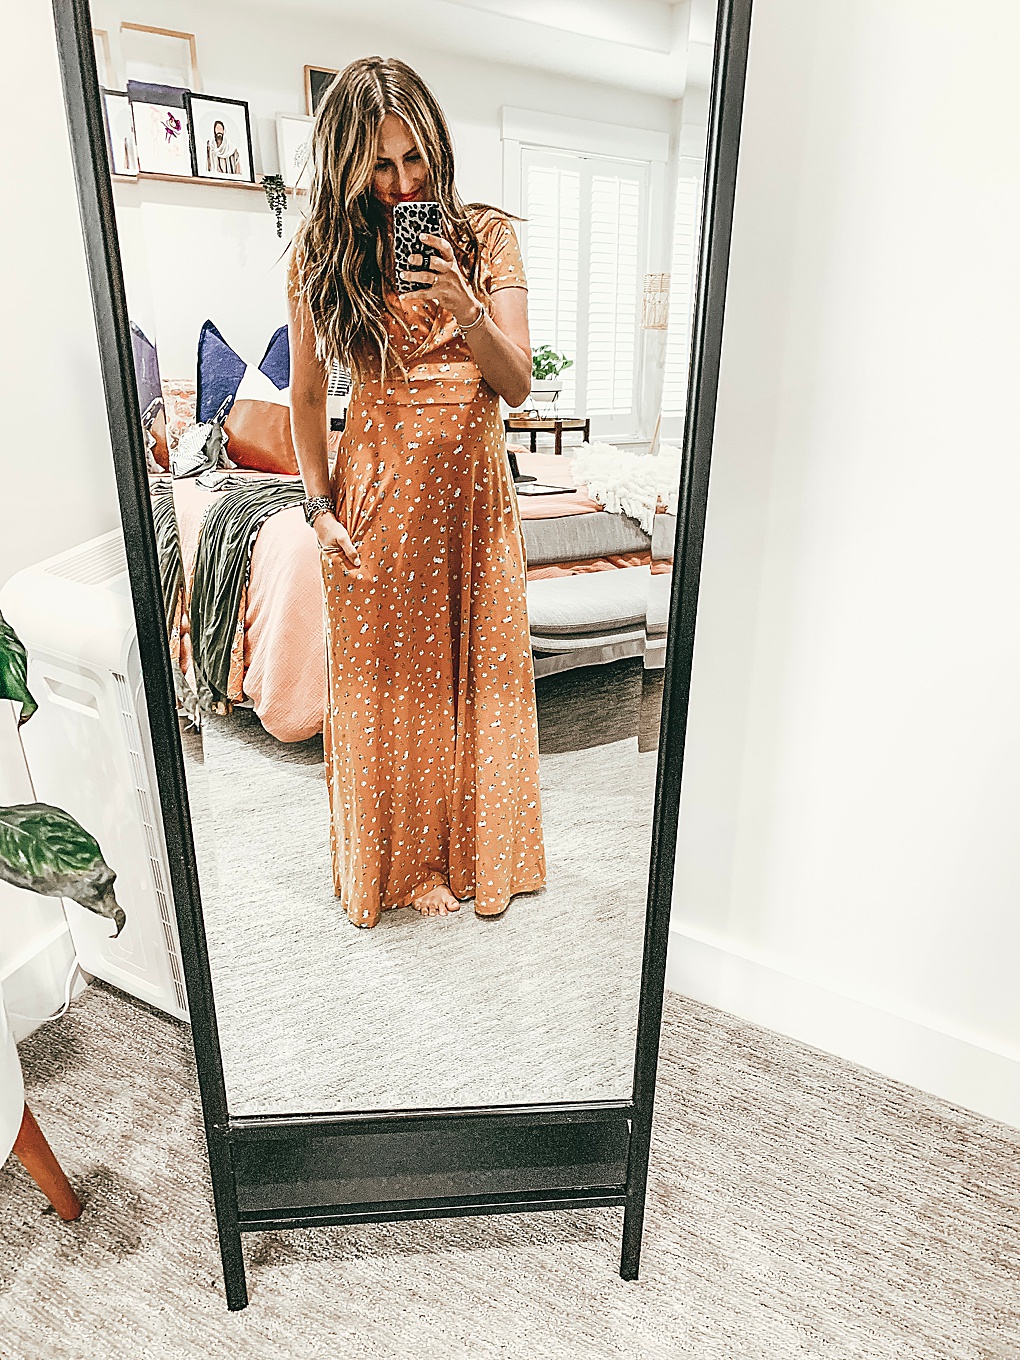 Ready for another Amazon Try-On? Utah Style Blogger Dani Marie is sharing her favorite picks this month in heer August Amazon Try-On.  See them HERE!